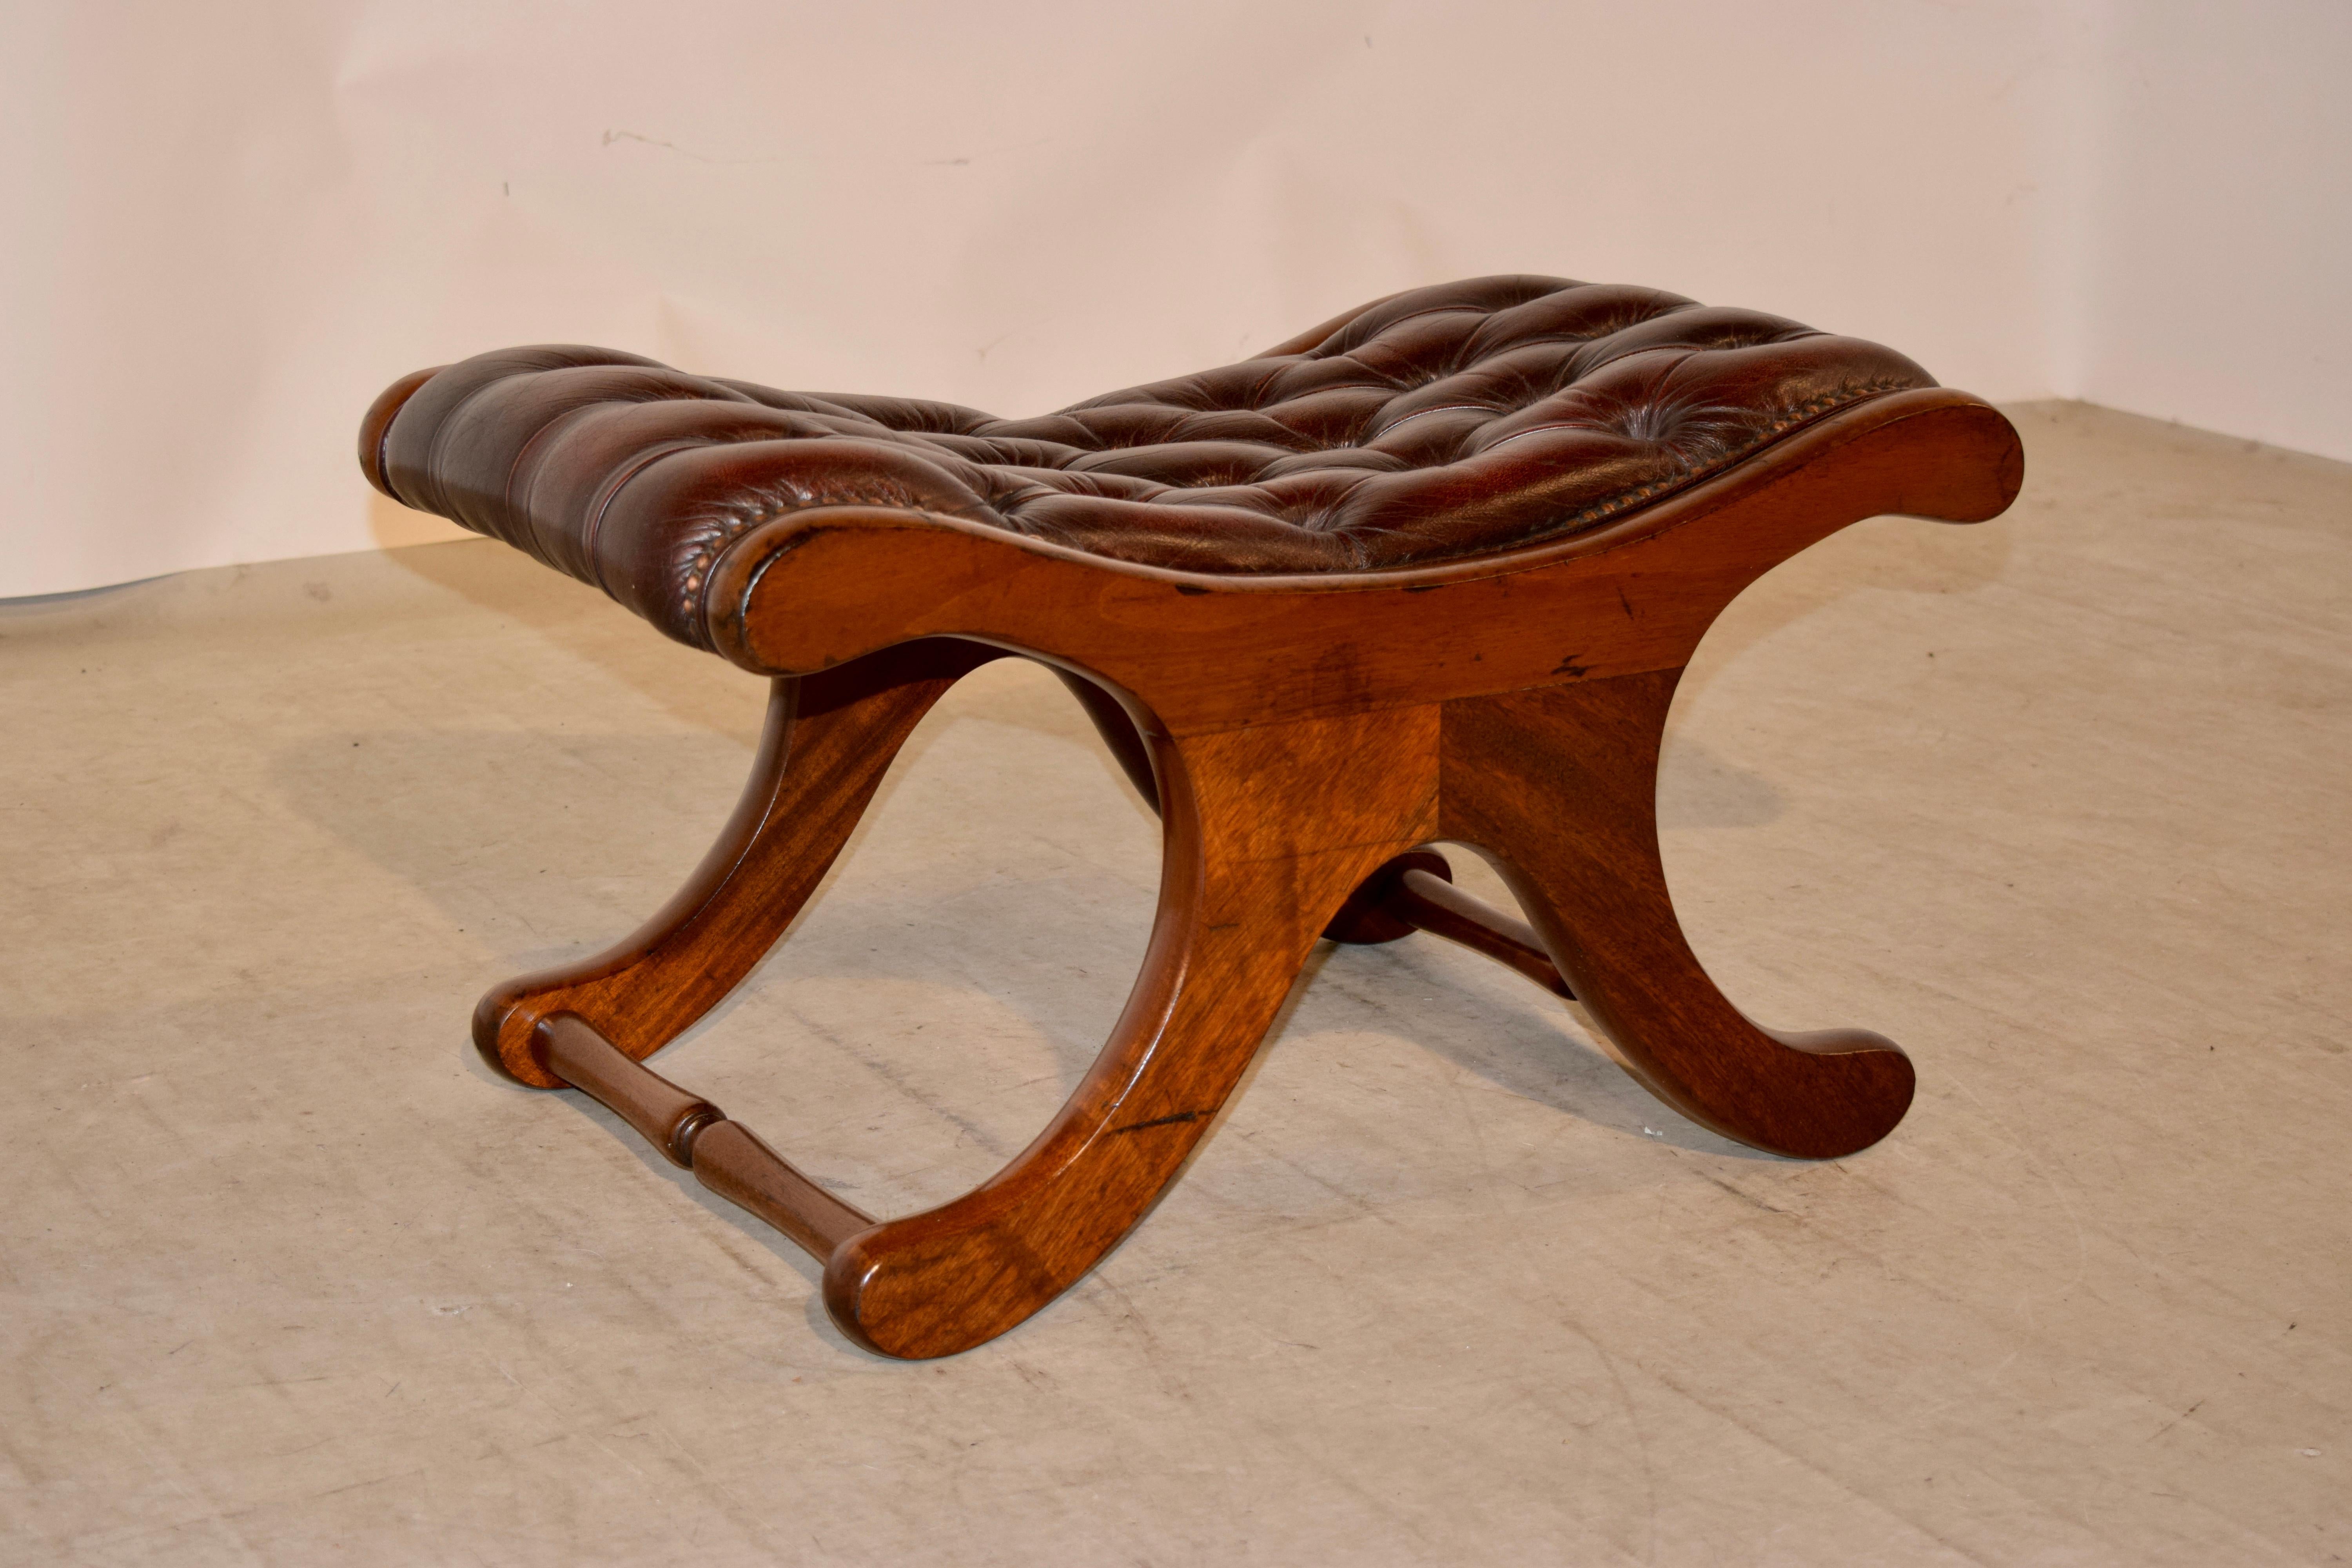 English mahogany stool with a Chesterfield upholstered leather top in rich brown with brass tack decoration, circa 1920.
 